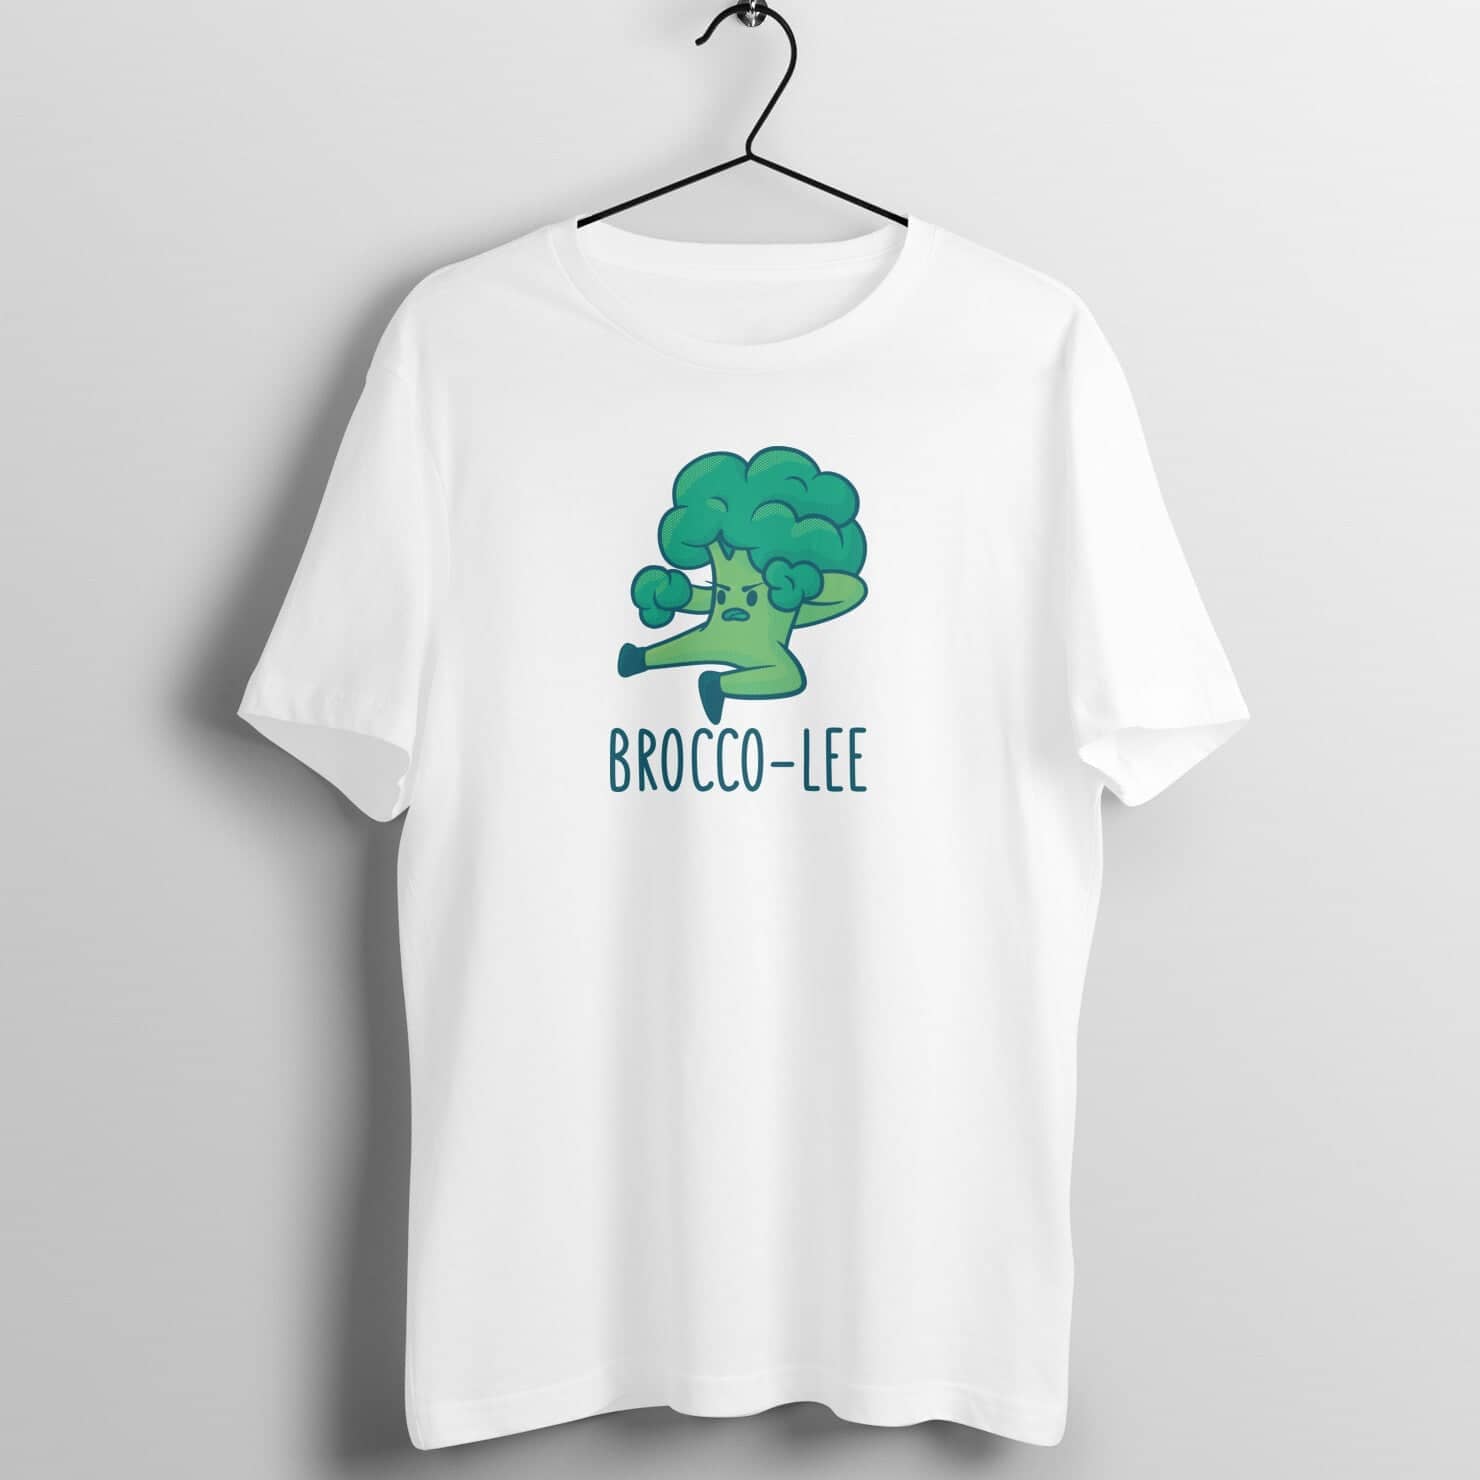 Brocco-Lee Funny White T Shirt for Men and Women Printrove White S 